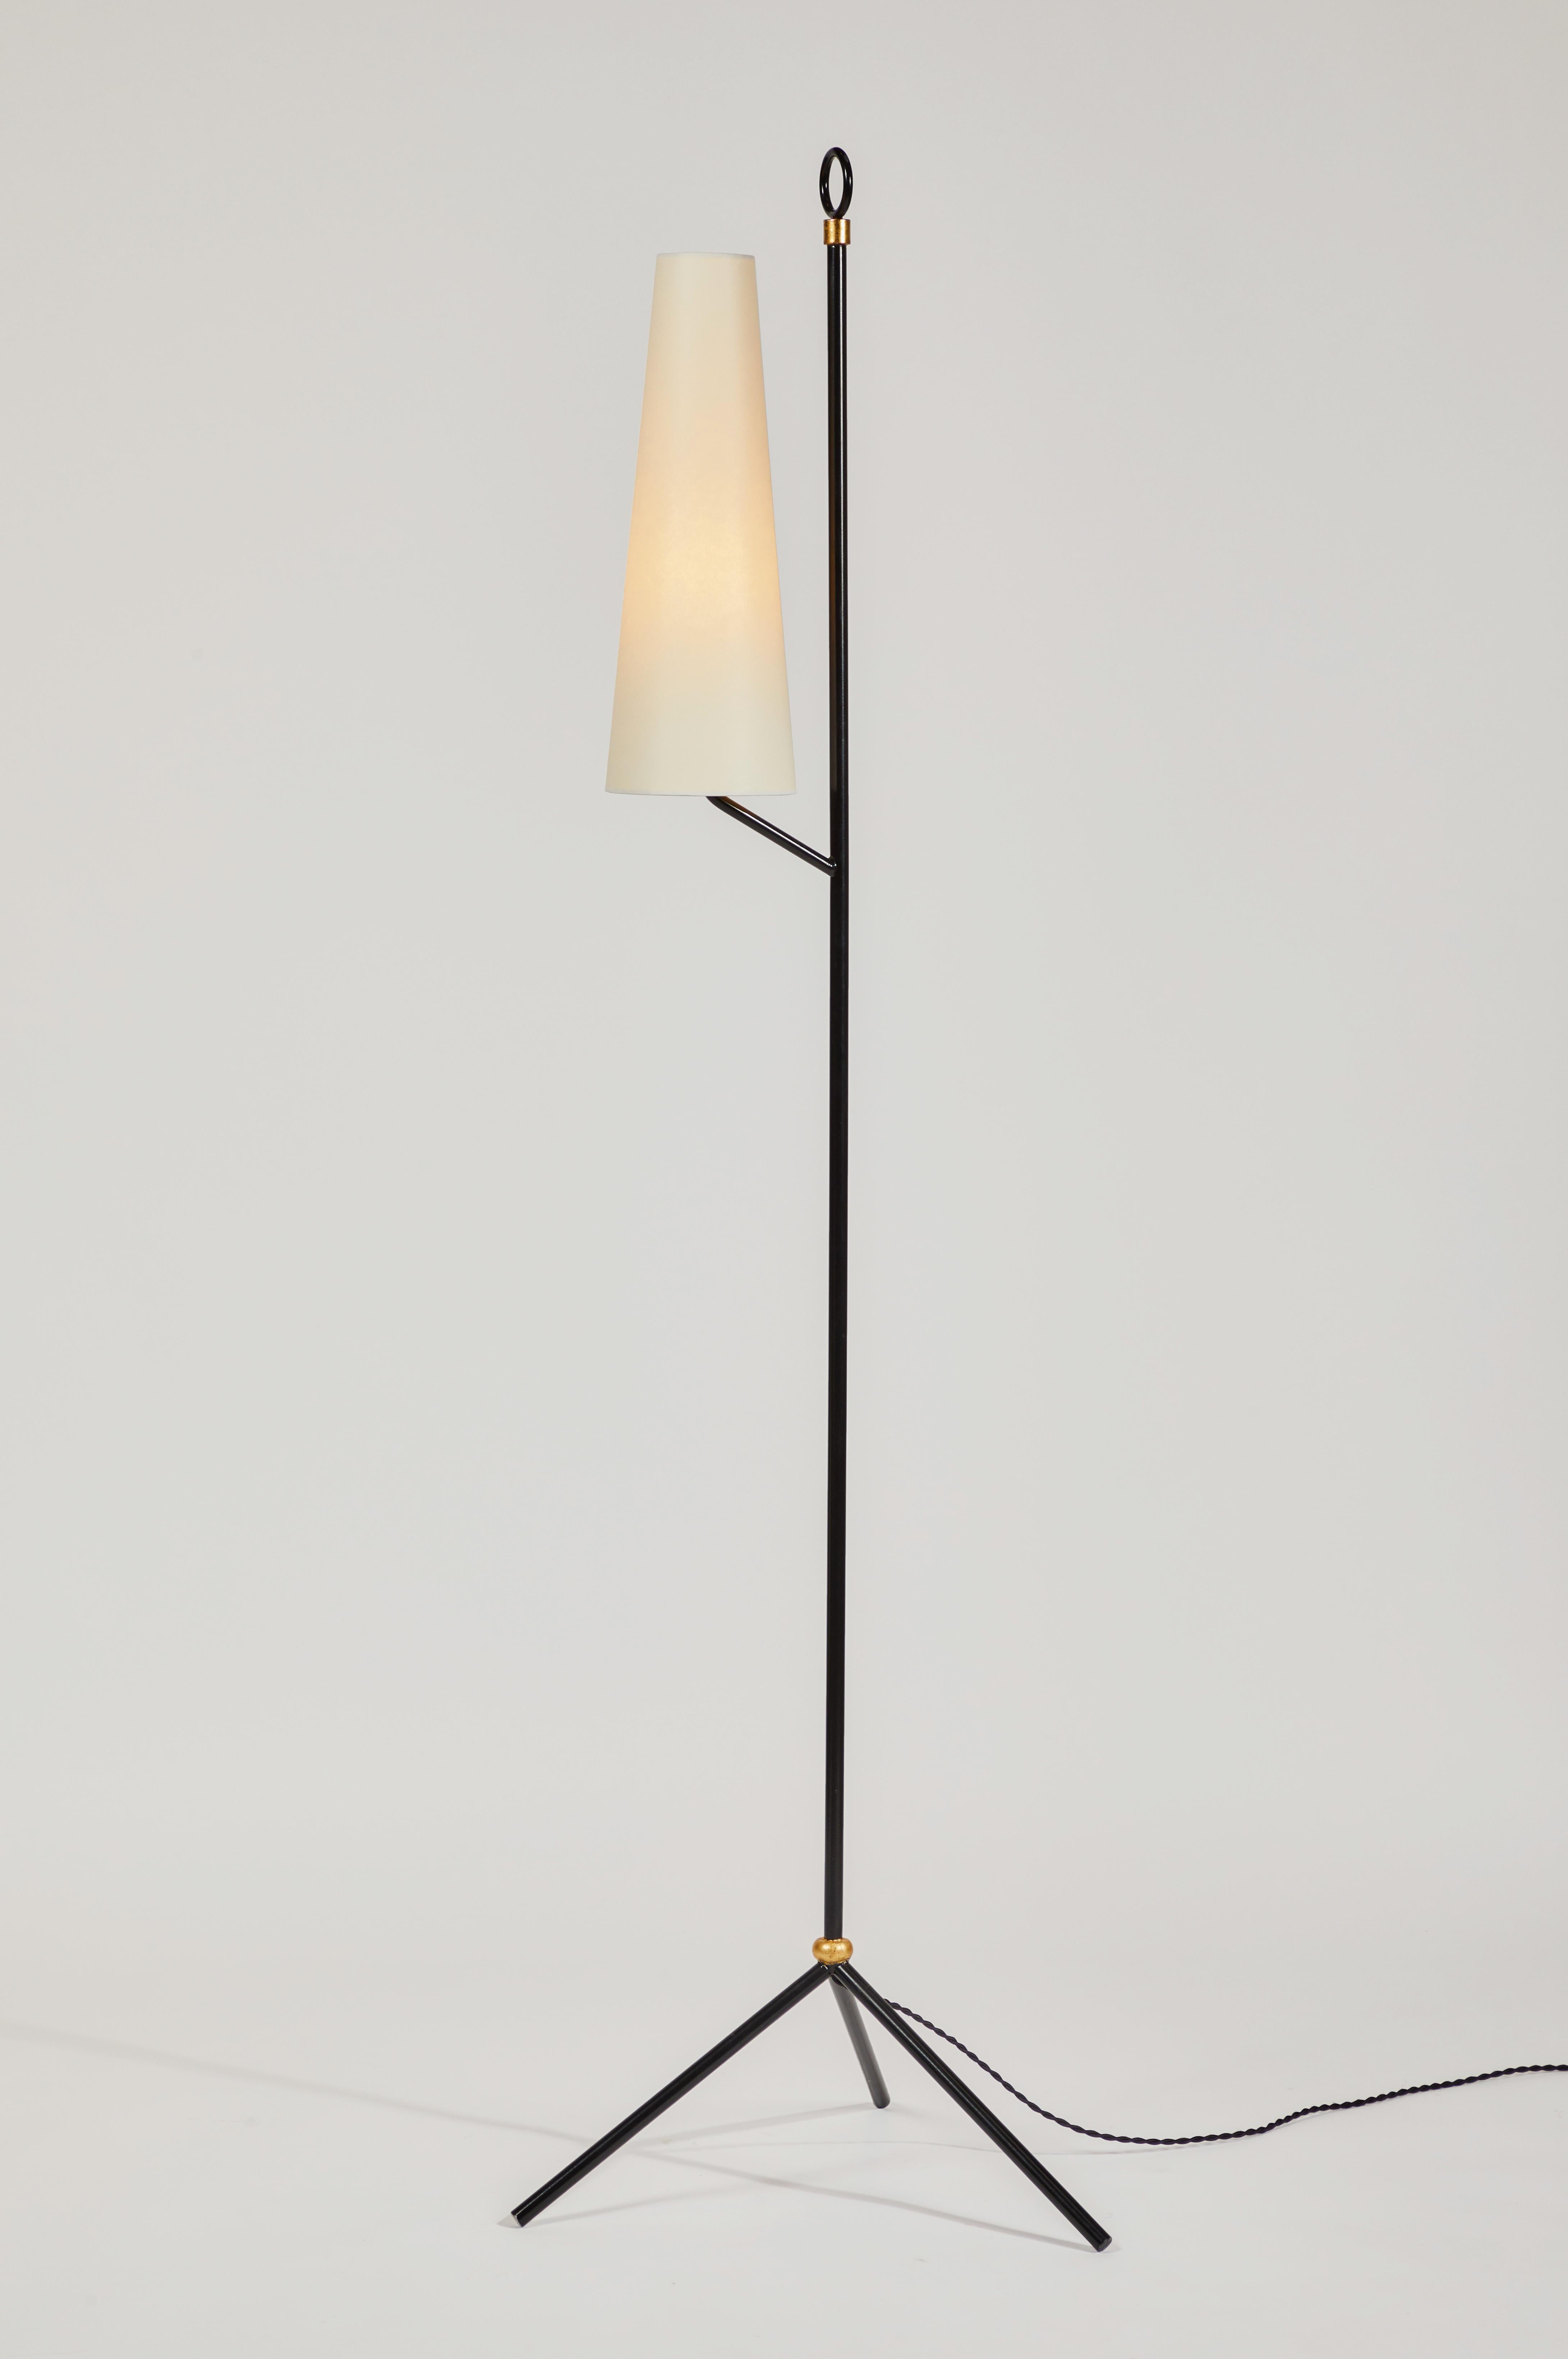 Sculptural custom tripod floor lamp. Handcrafted in Los Angeles with scrupulous attention to detail and materials. Executed in high quality lacquered metal and patinated gold leaf with rigid parchment shades, this ultra refined design adds a